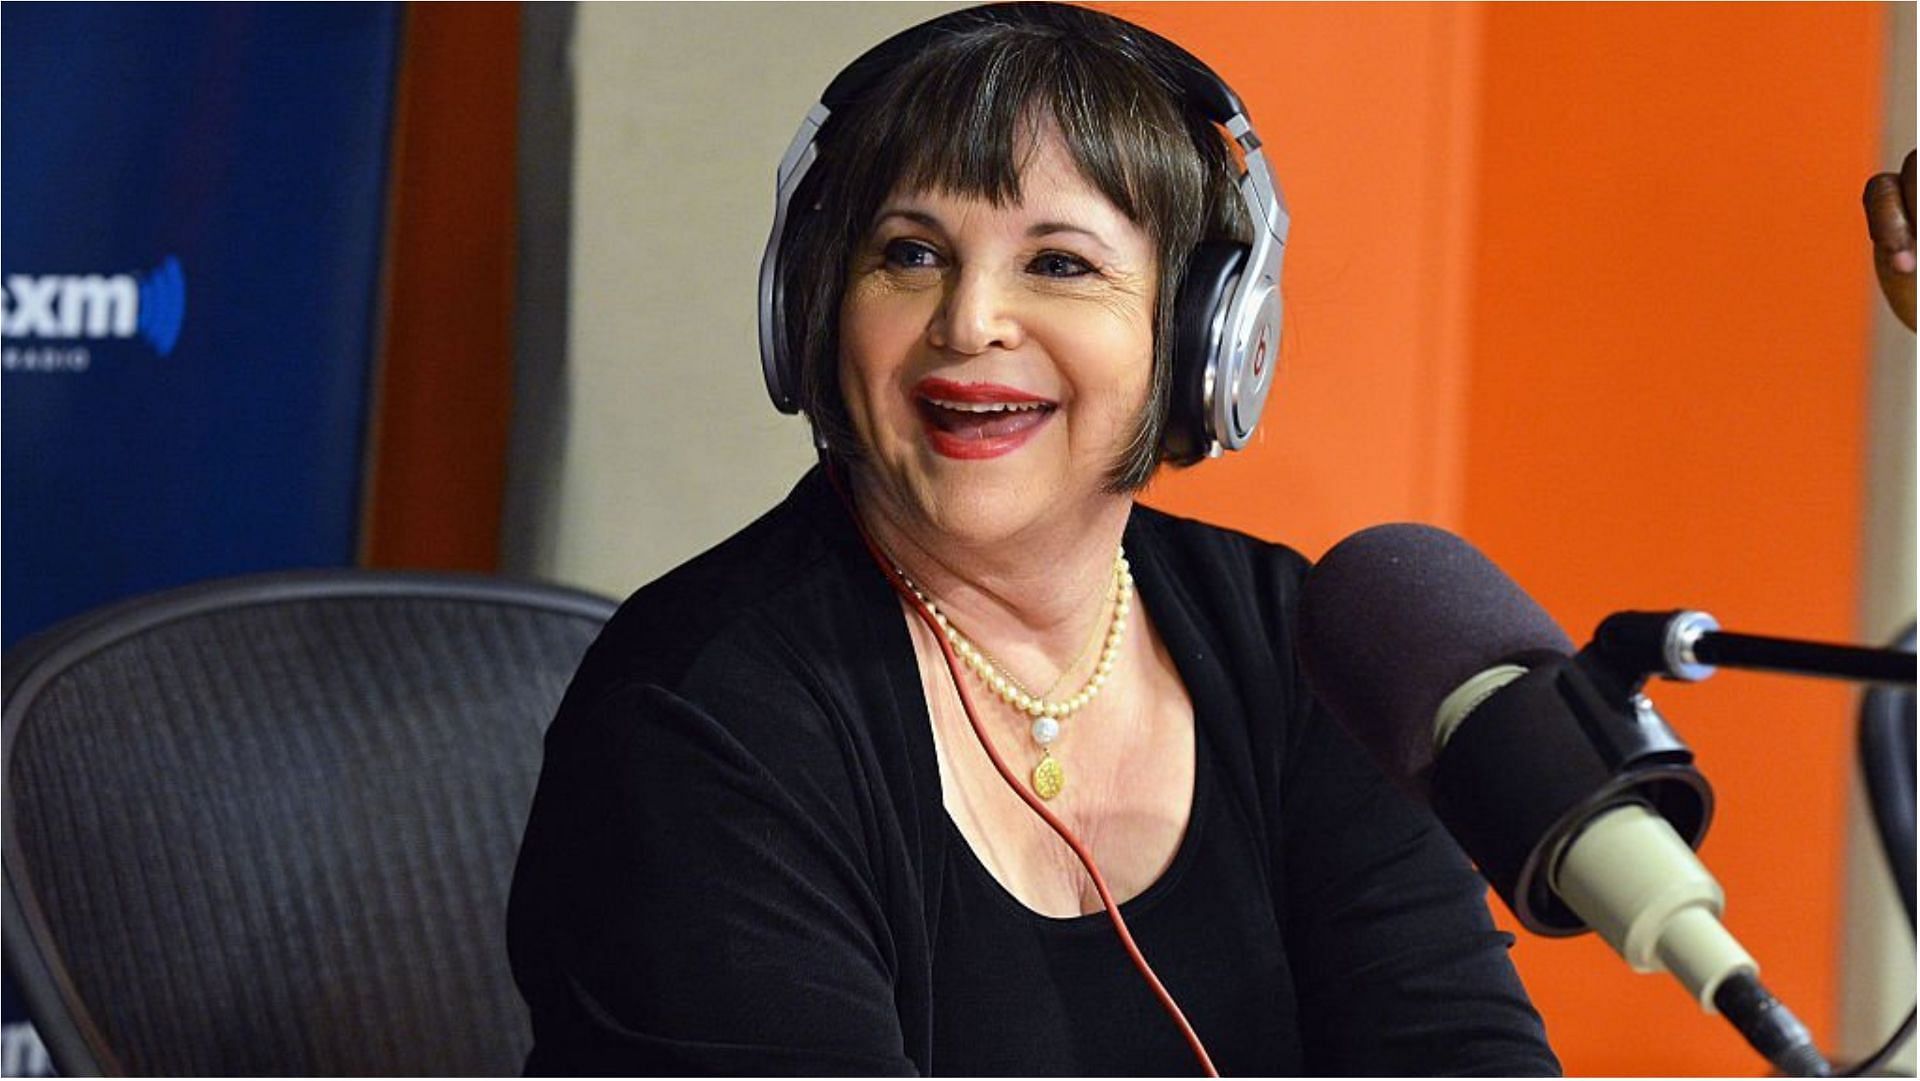 Cindy Williams earned a lot from her career in the entertainment industry (Image via Slaven Vlasic/Getty Images)